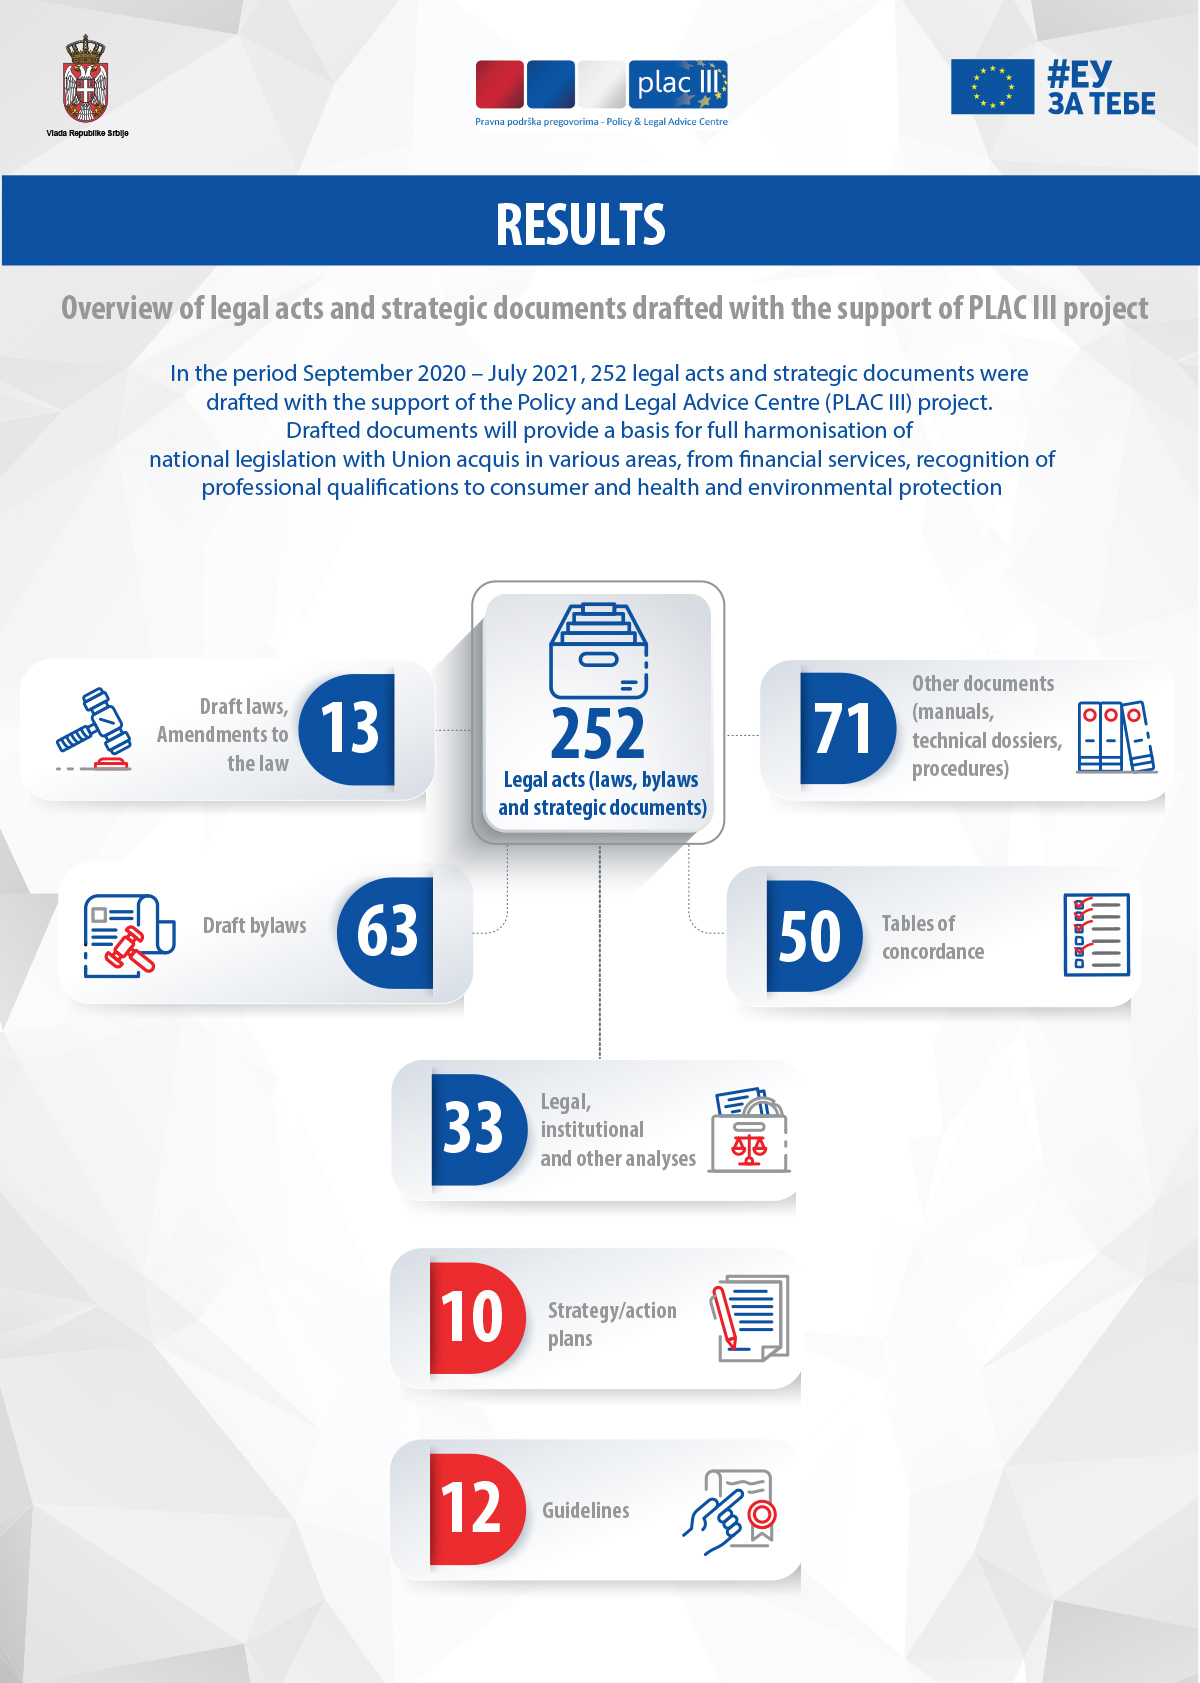 Infographic 5: Overview of legal acts and strategic documents drafted with support of PLAC III project